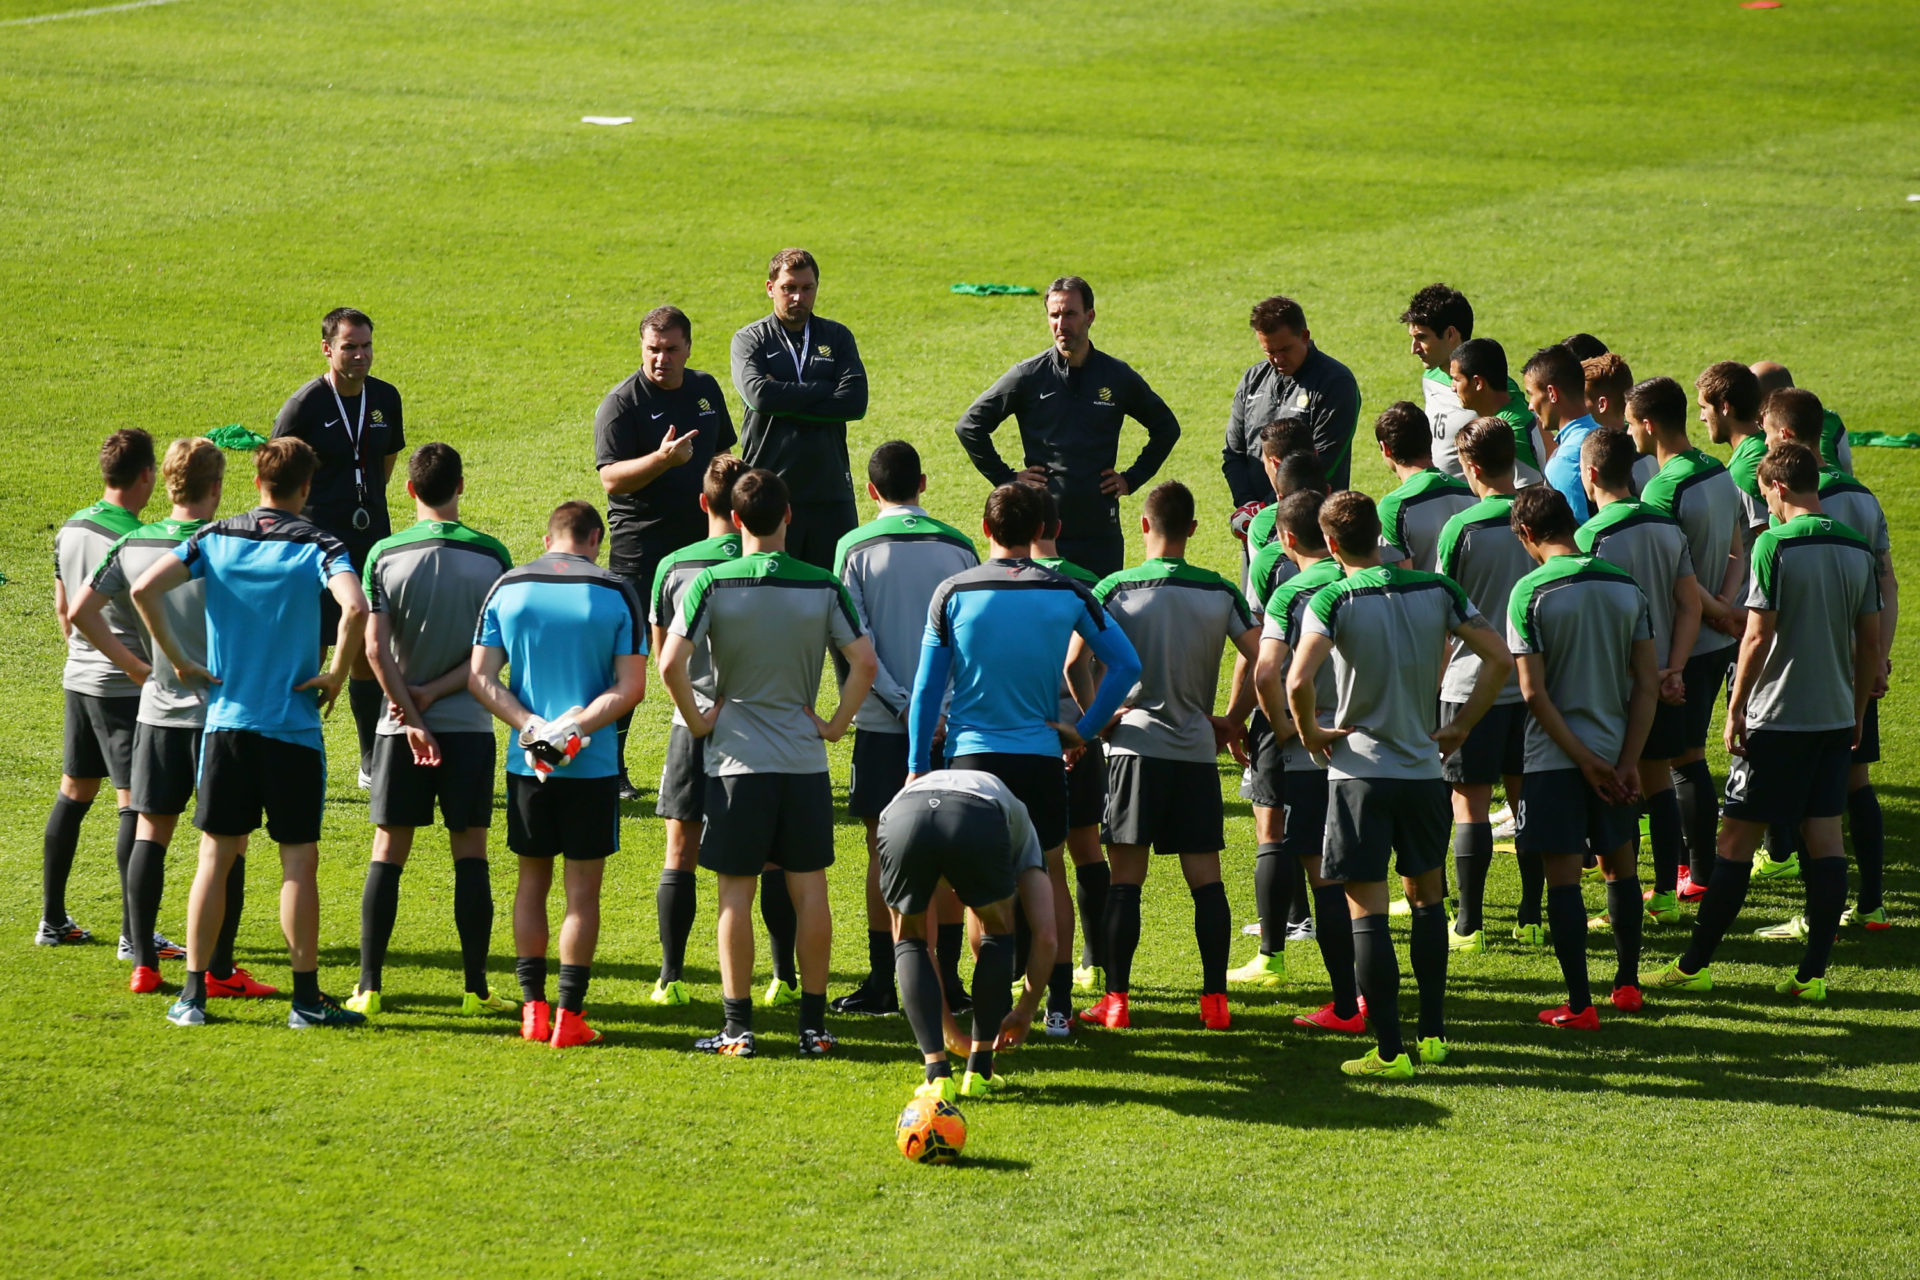 Ange addressing the Socceroos in 2014